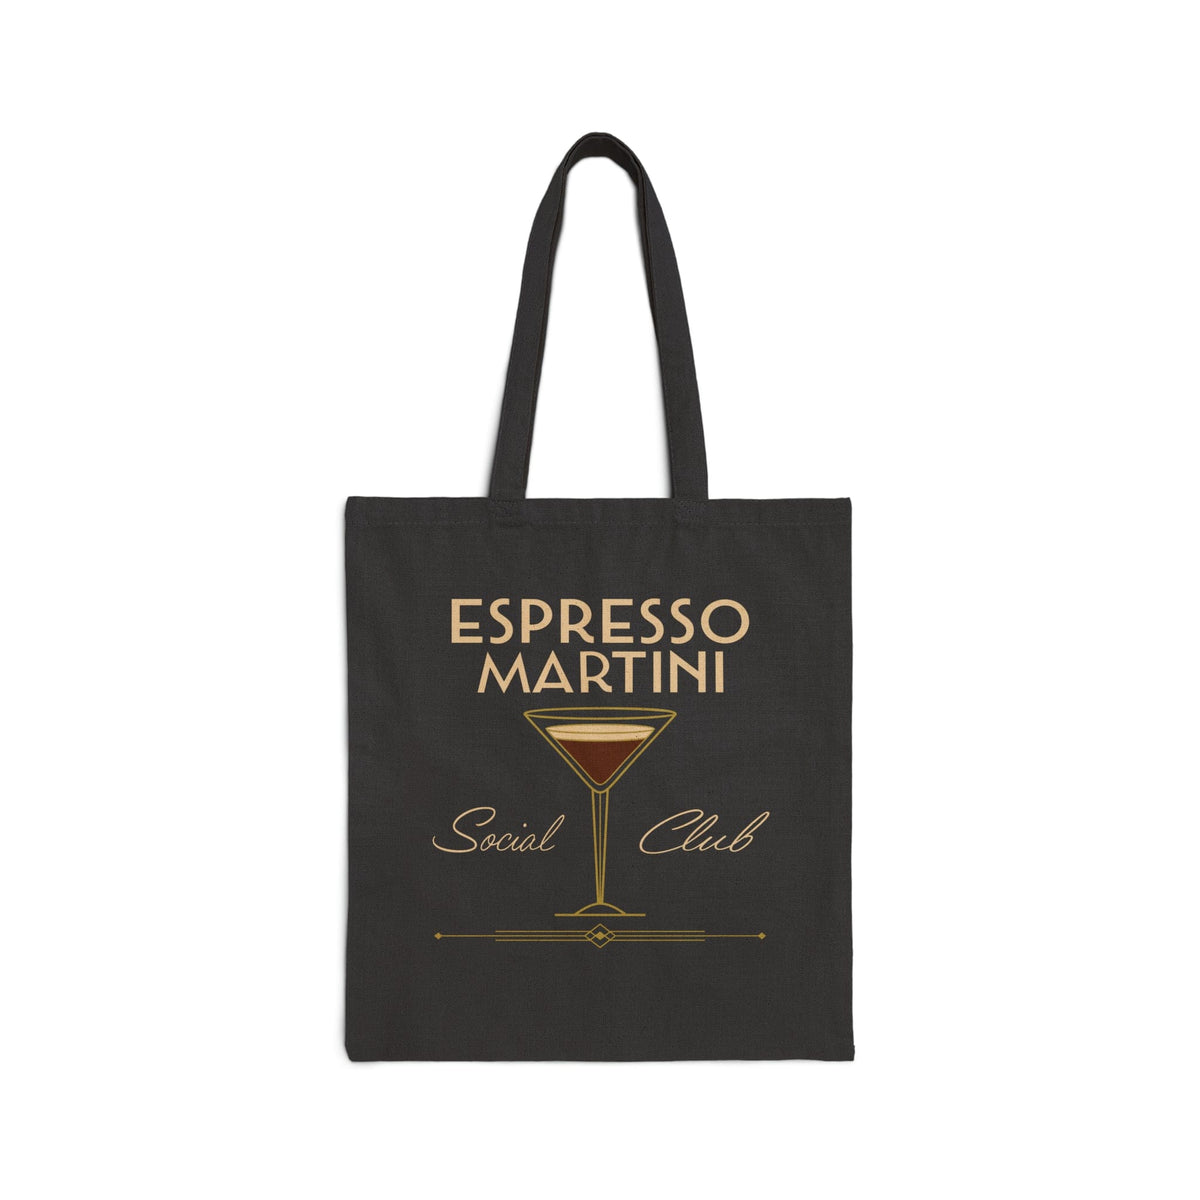 Espresso Social Club Canvas Tote | Girls Trip | Reusable Bags | Ladies Night | Gift Bag Bags TheFringeCultureCollective